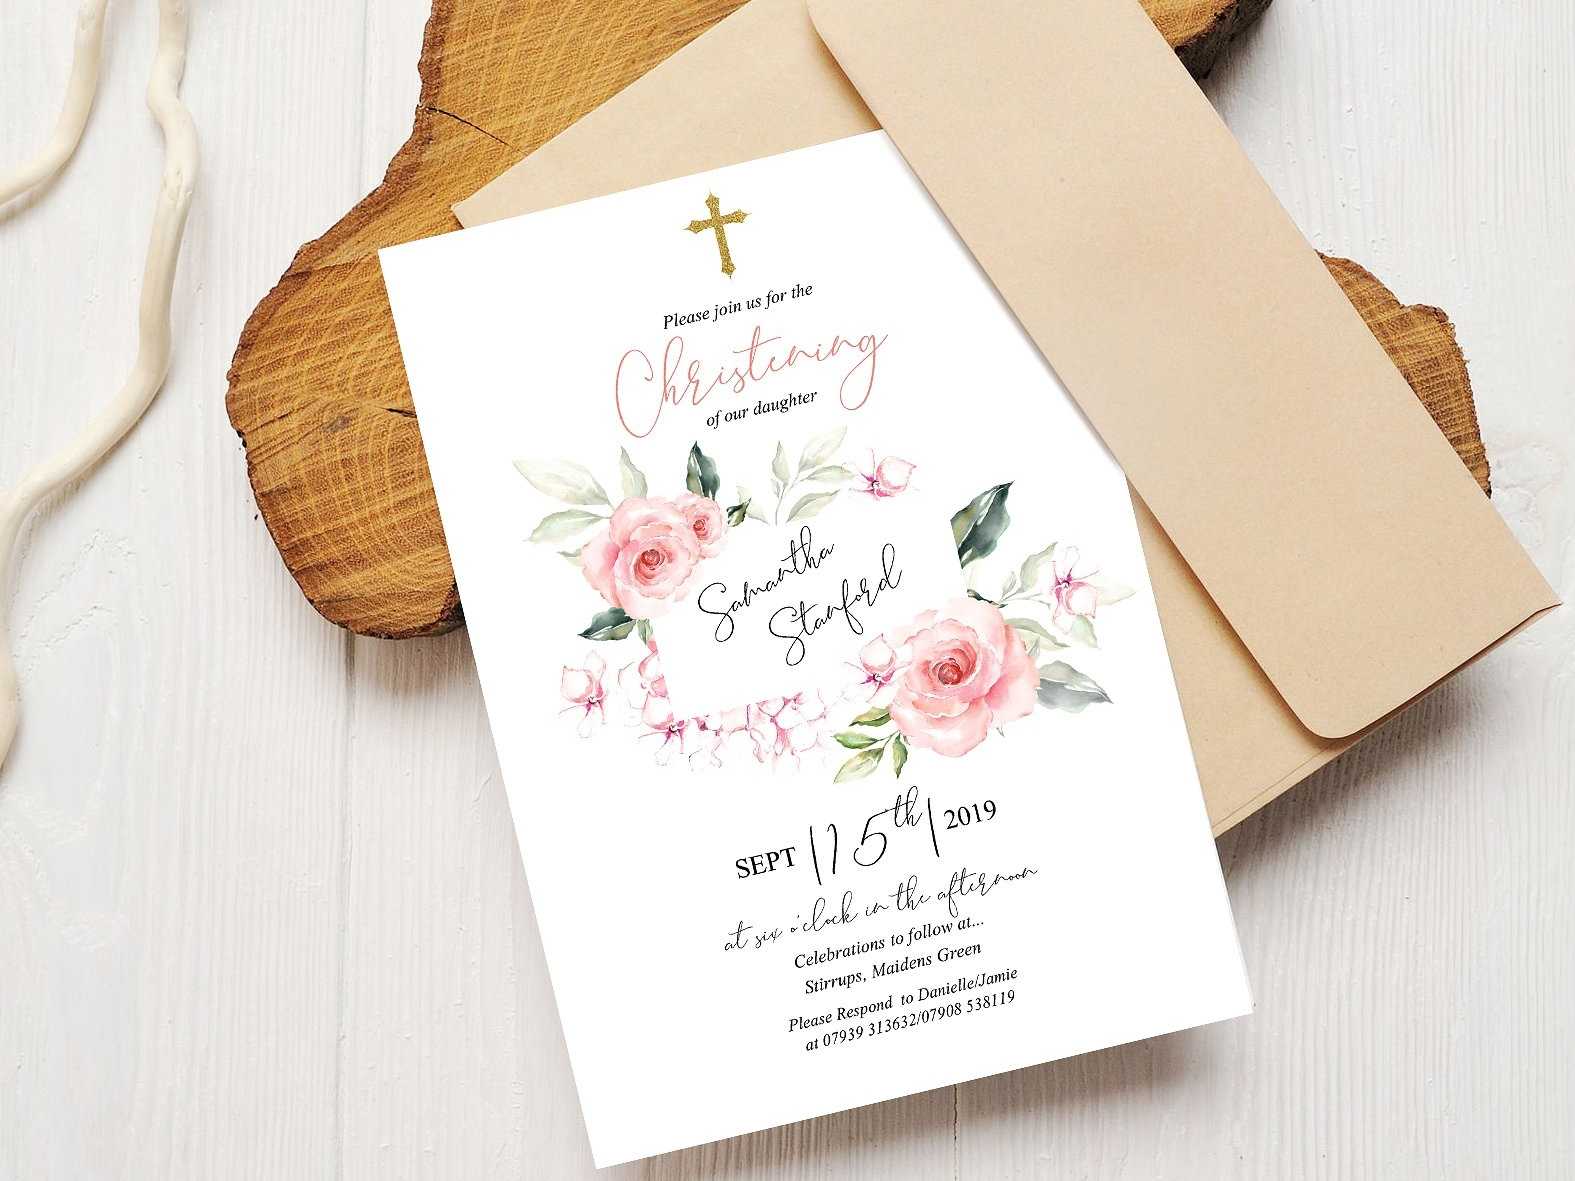 Christening Invitation Templateinvitations On Dribbble For Celebrate It Templates Place Cards